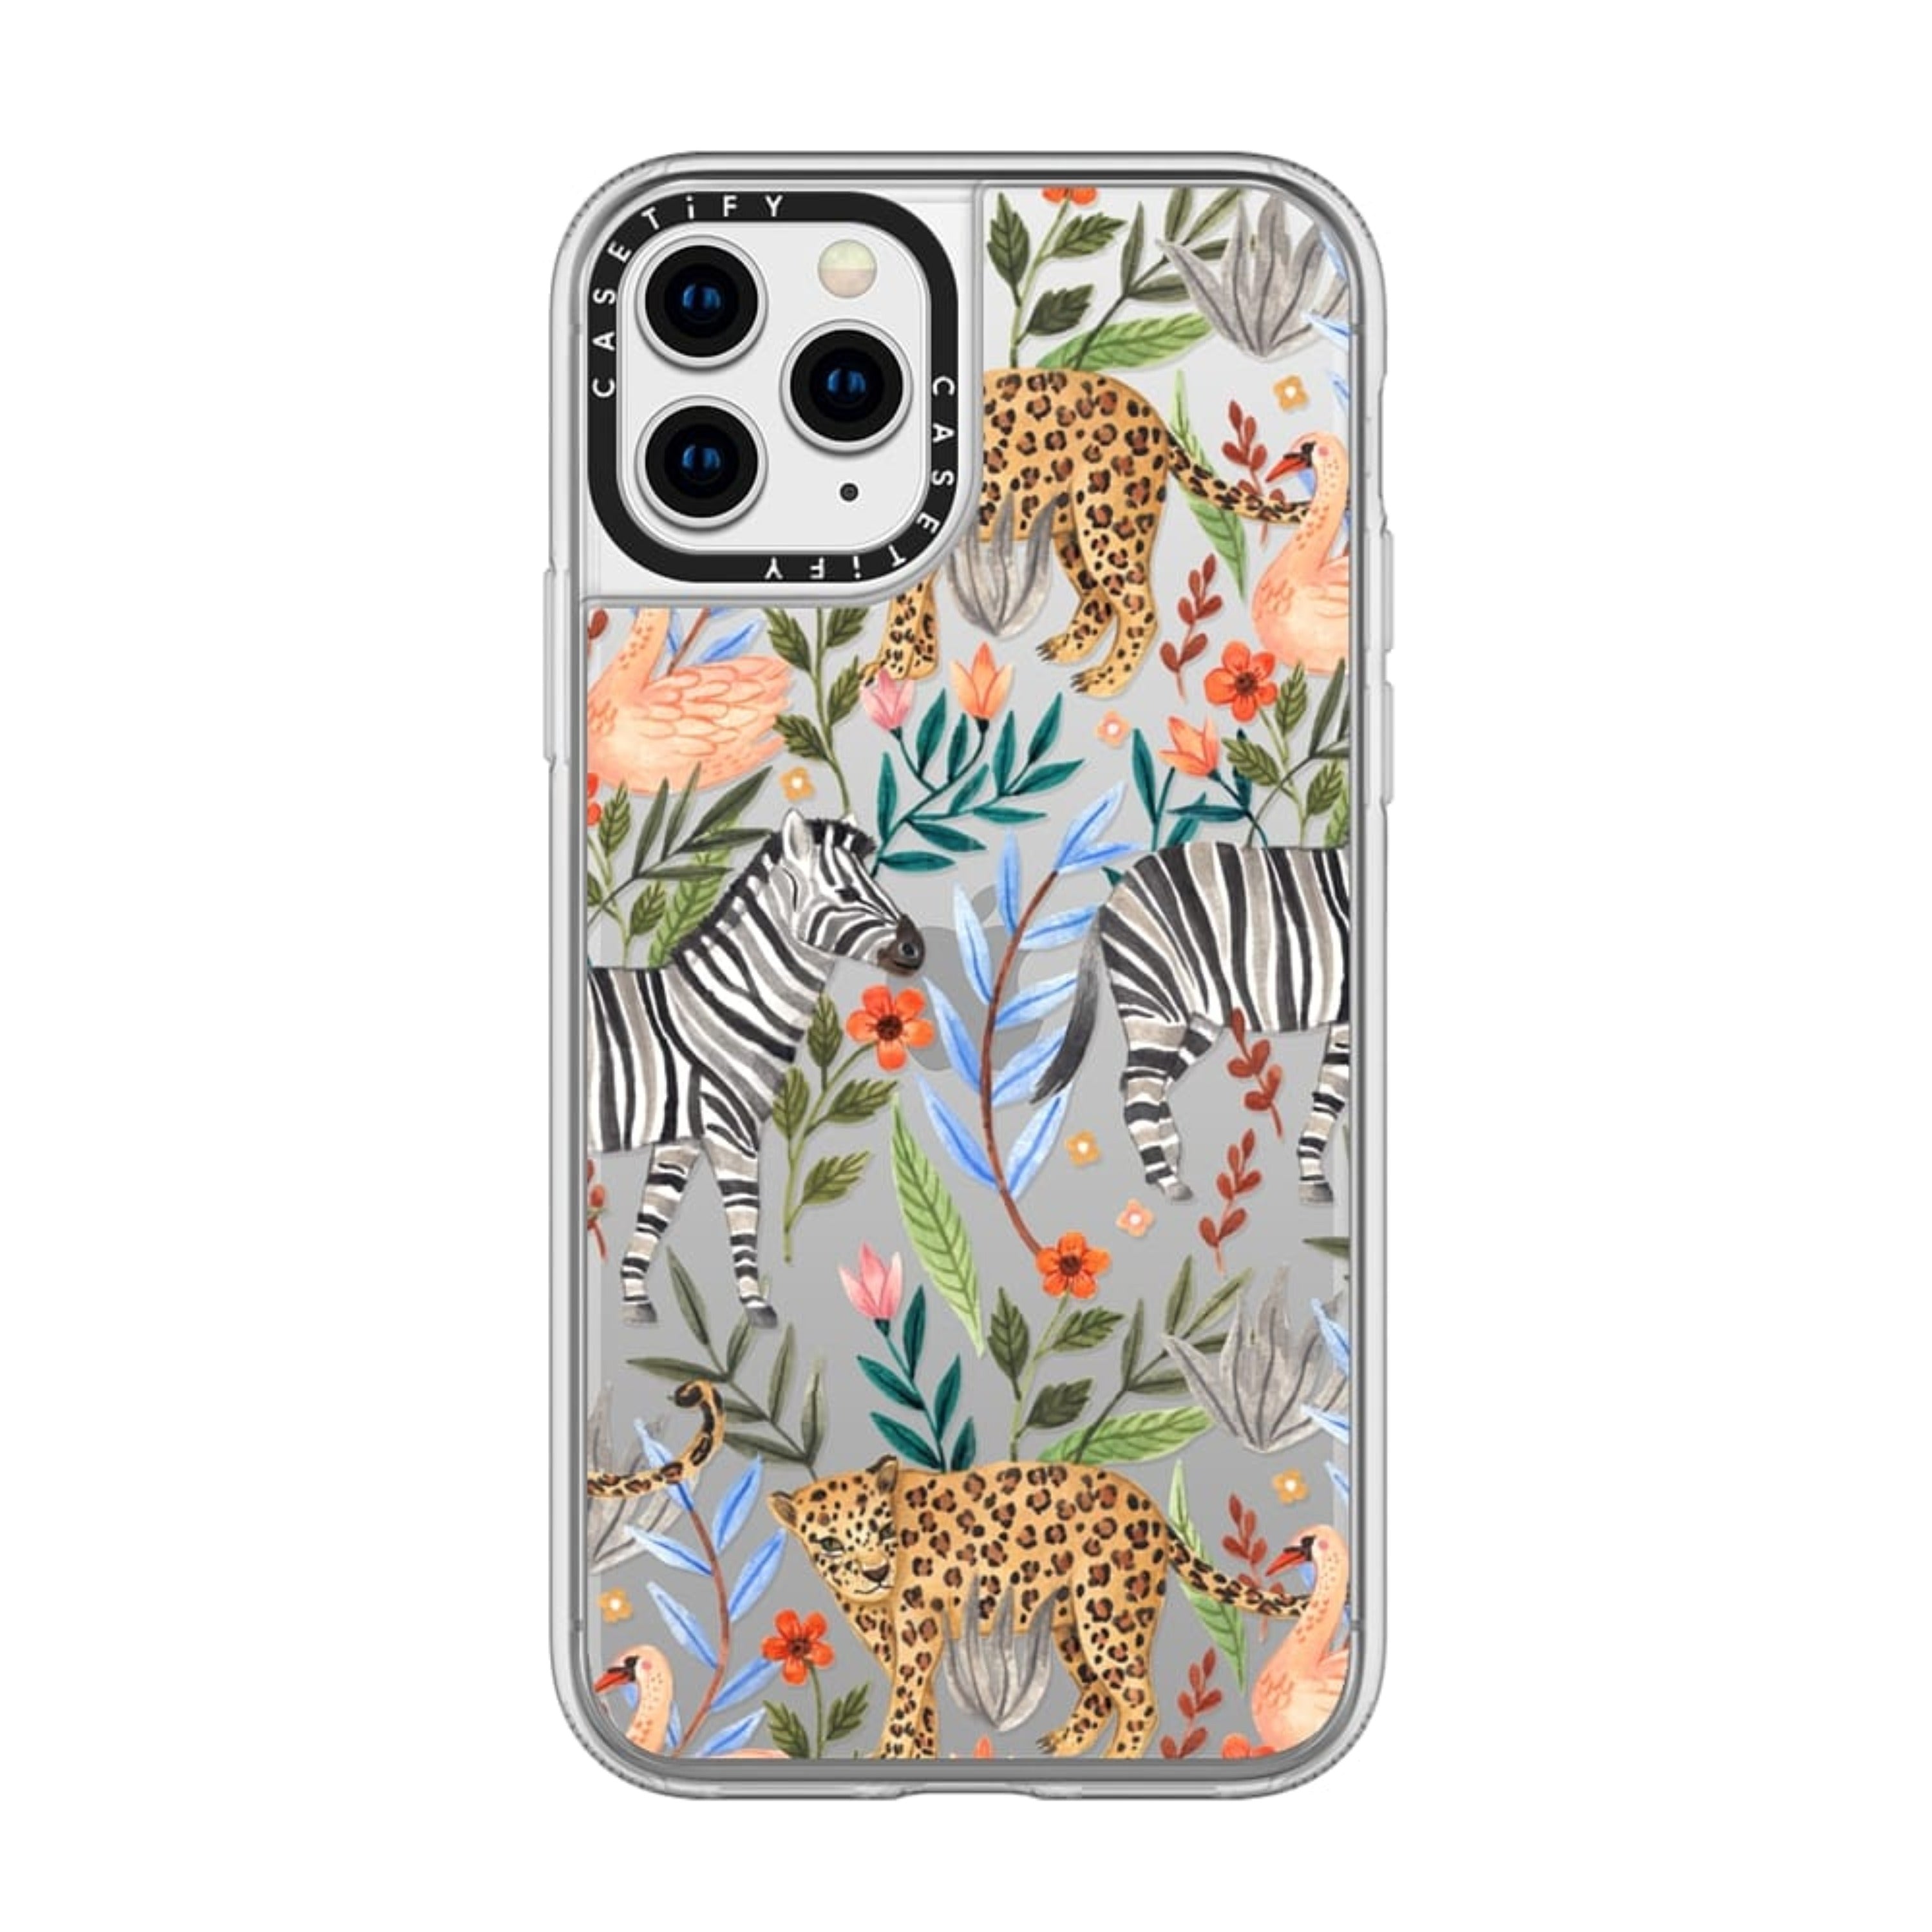 Casetify iPhone Grip Moody Jungle Case